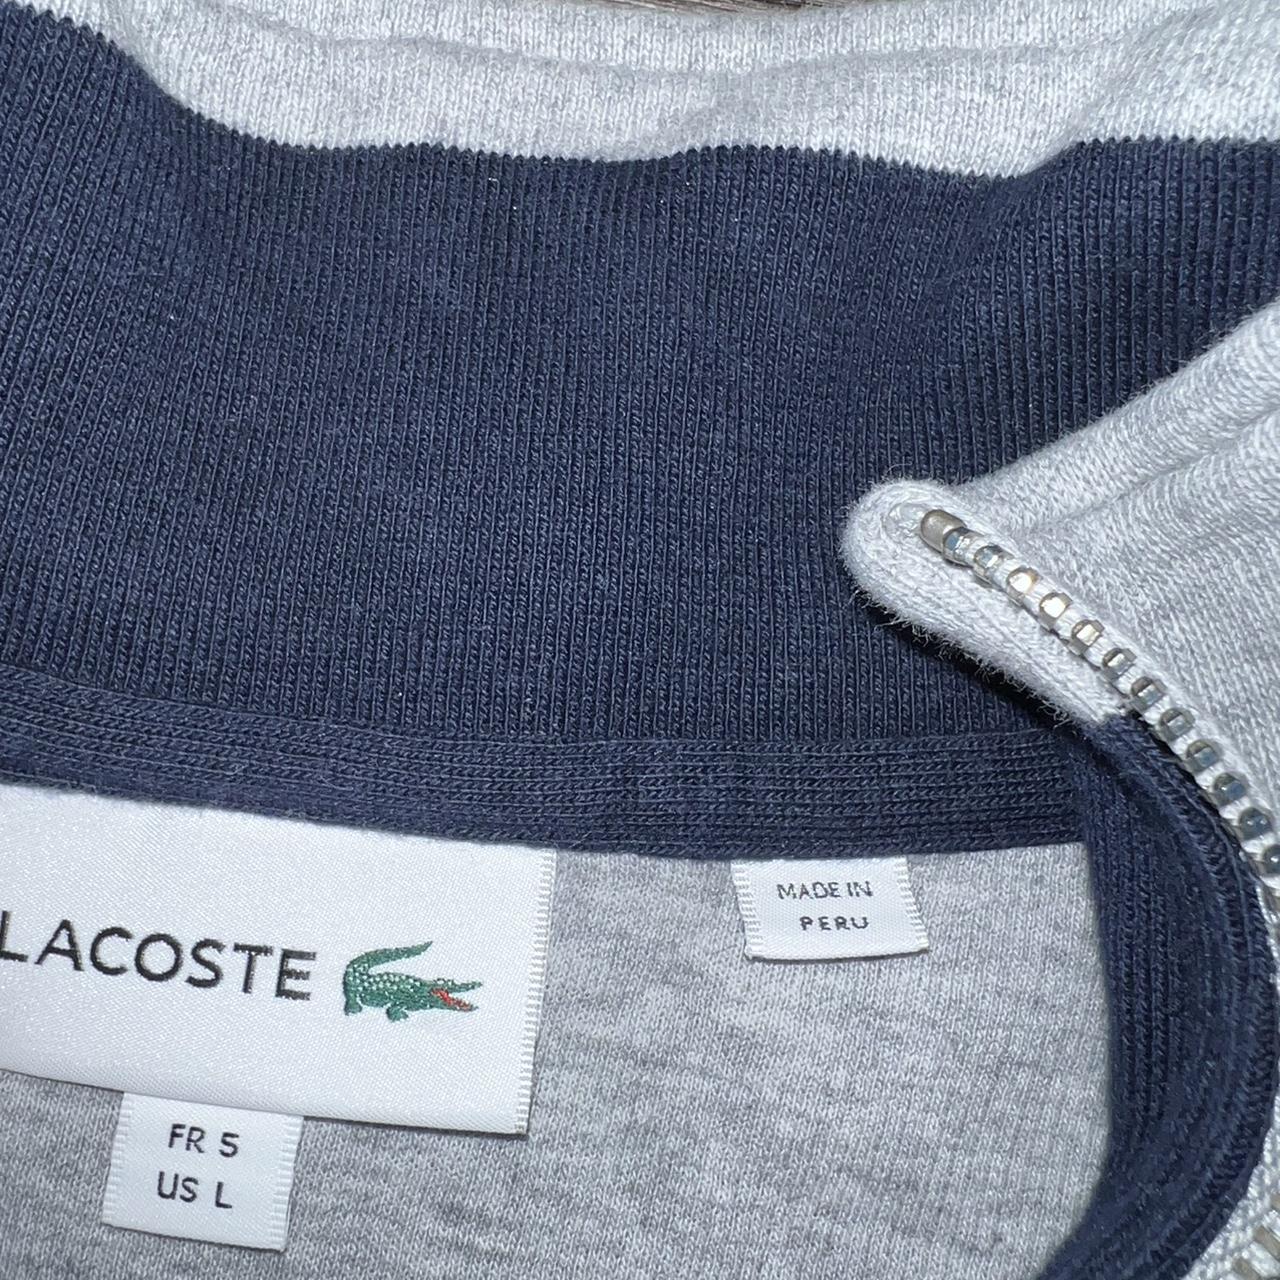 Lacoste Men's Grey and White Jumper (2)